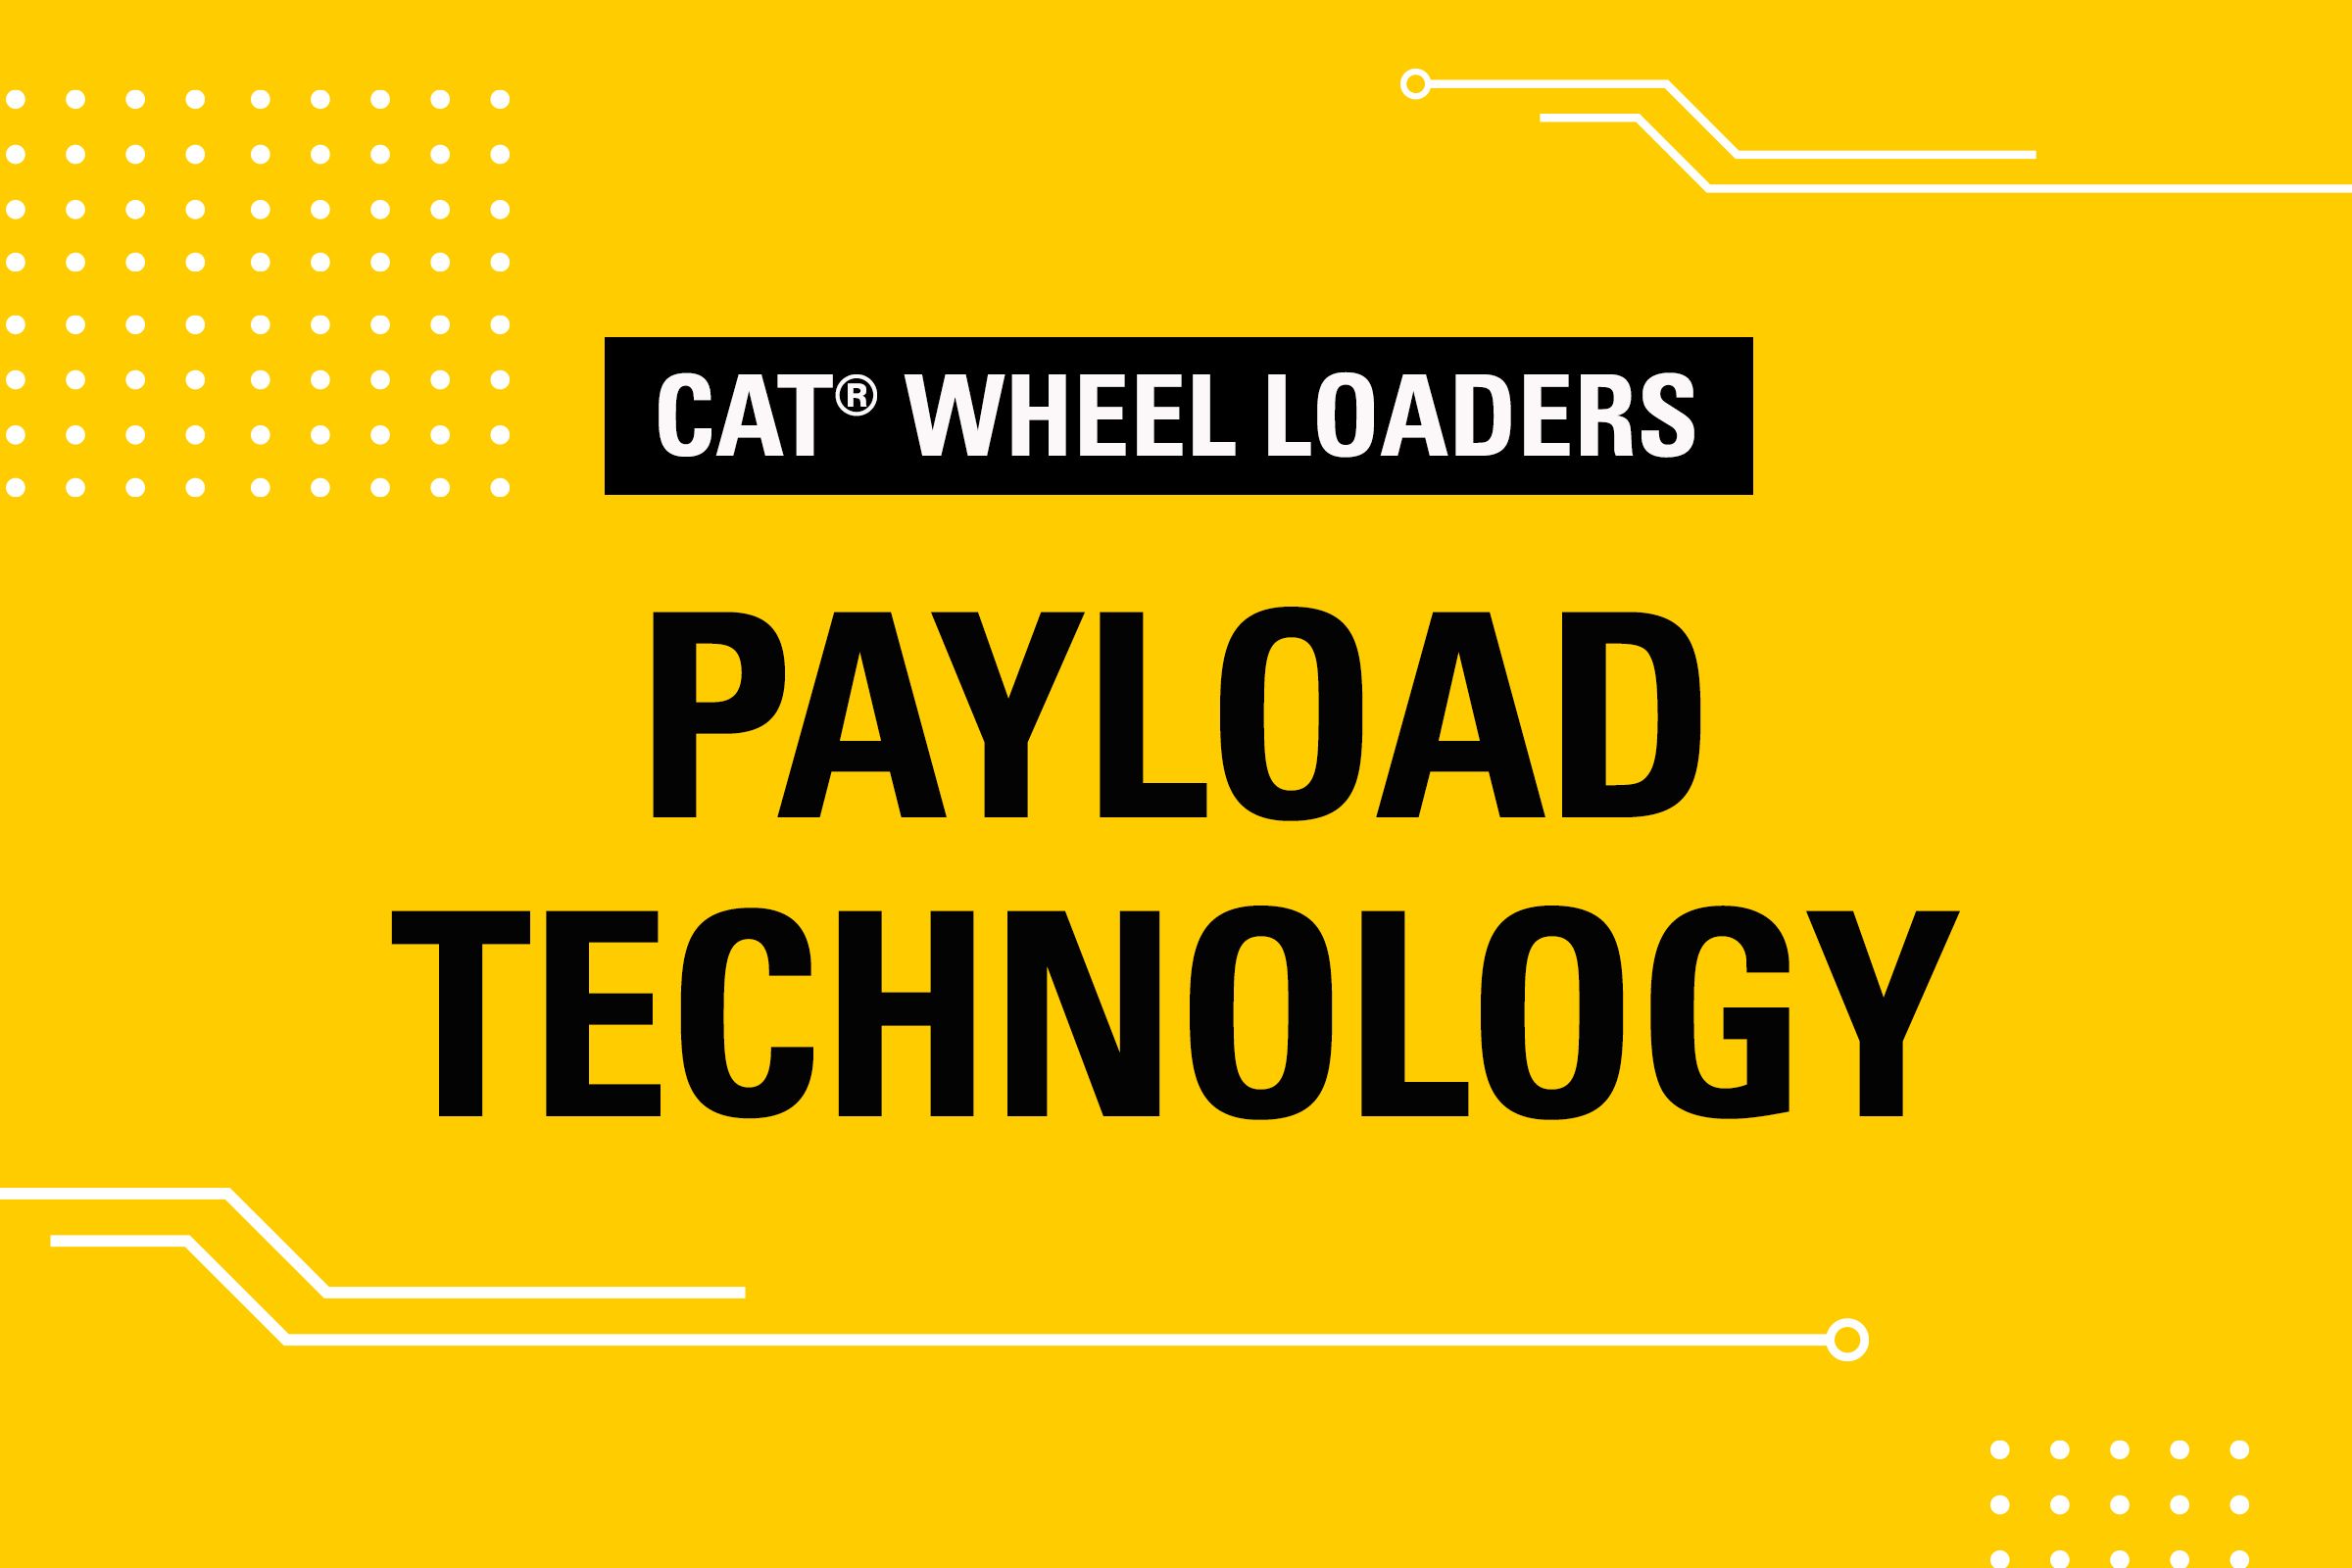 Wheel Loaders payload technology